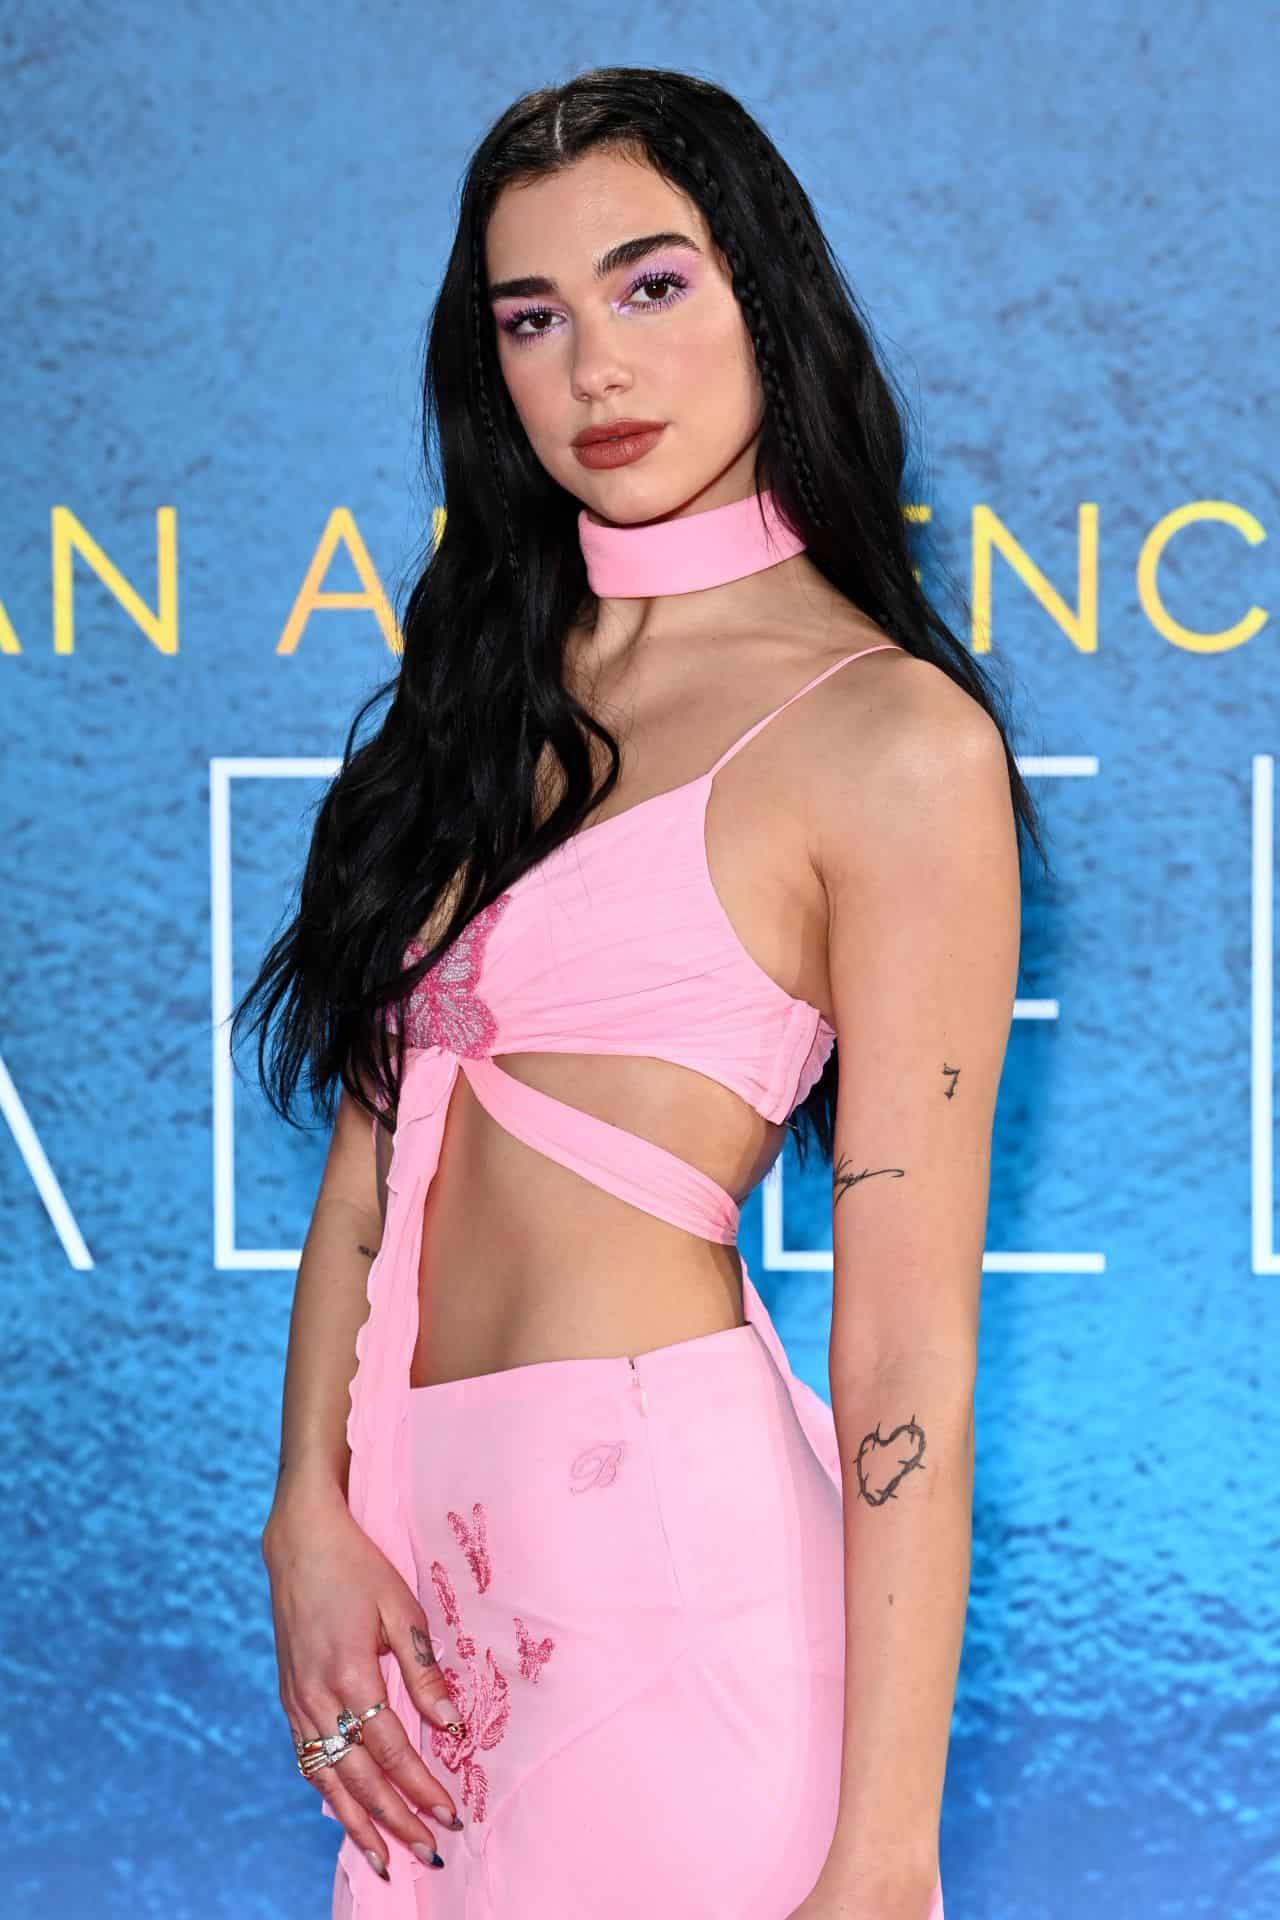 Dua Lipa Rocks a Pink Two-piece Outfit at Adele’s Event in London